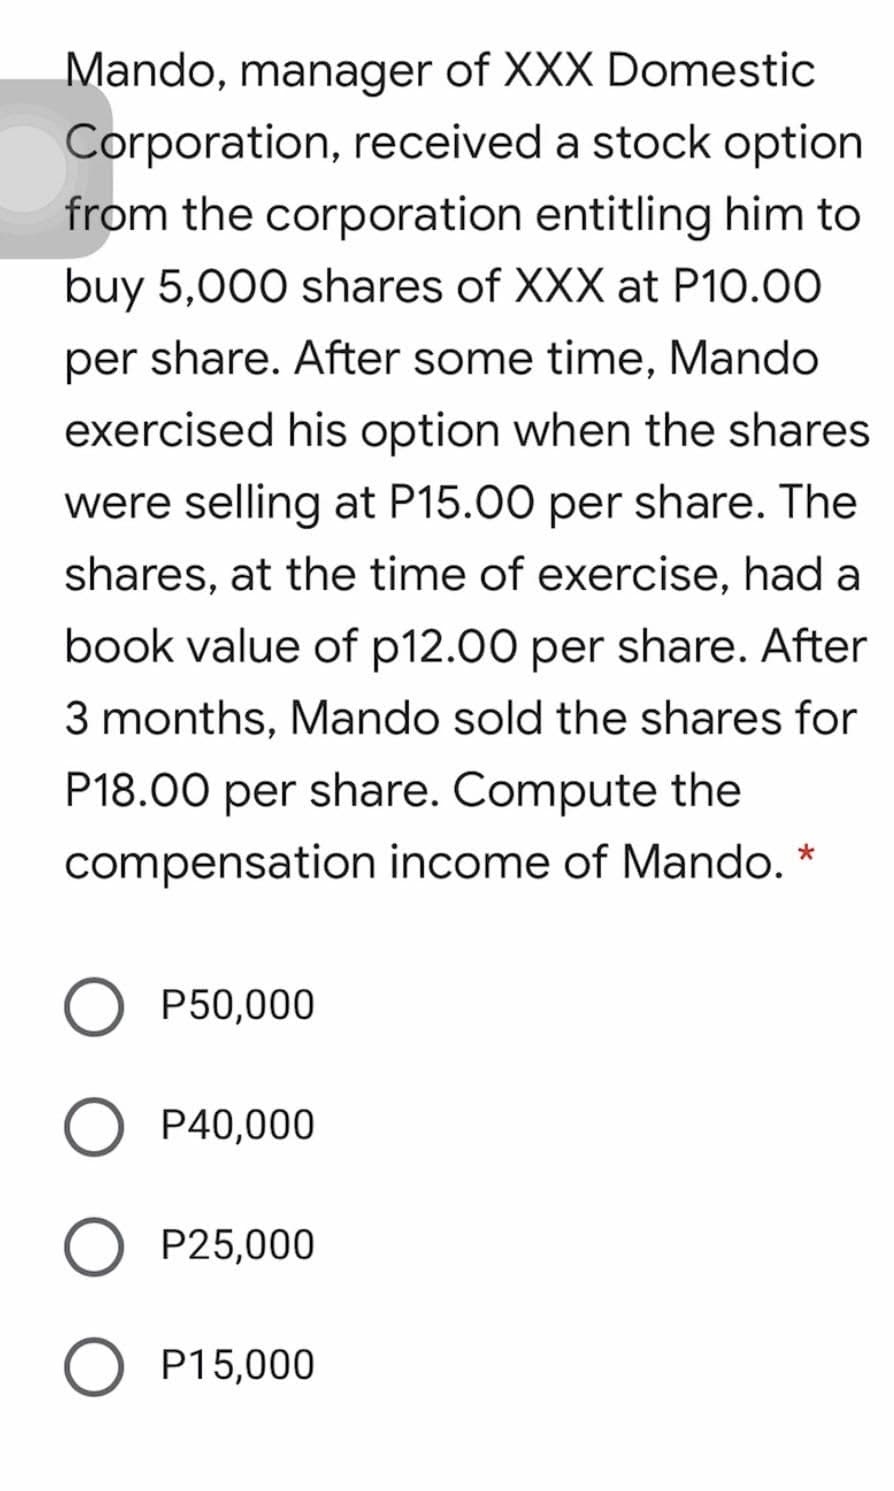 Mando, manager of XXX Domestic
Corporation, received a stock option
from the corporation entitling him to
buy 5,000 shares of XXX at P10.00
per share. After some time, Mando
exercised his option when the shares
were selling at P15.00 per share. The
shares, at the time of exercise, had a
book value of p12.00 per share. After
3 months, Mando sold the shares for
P18.00 per share. Compute the
compensation income of Mando. *
P50,000
O P40,000
P25,000
O P15,000
